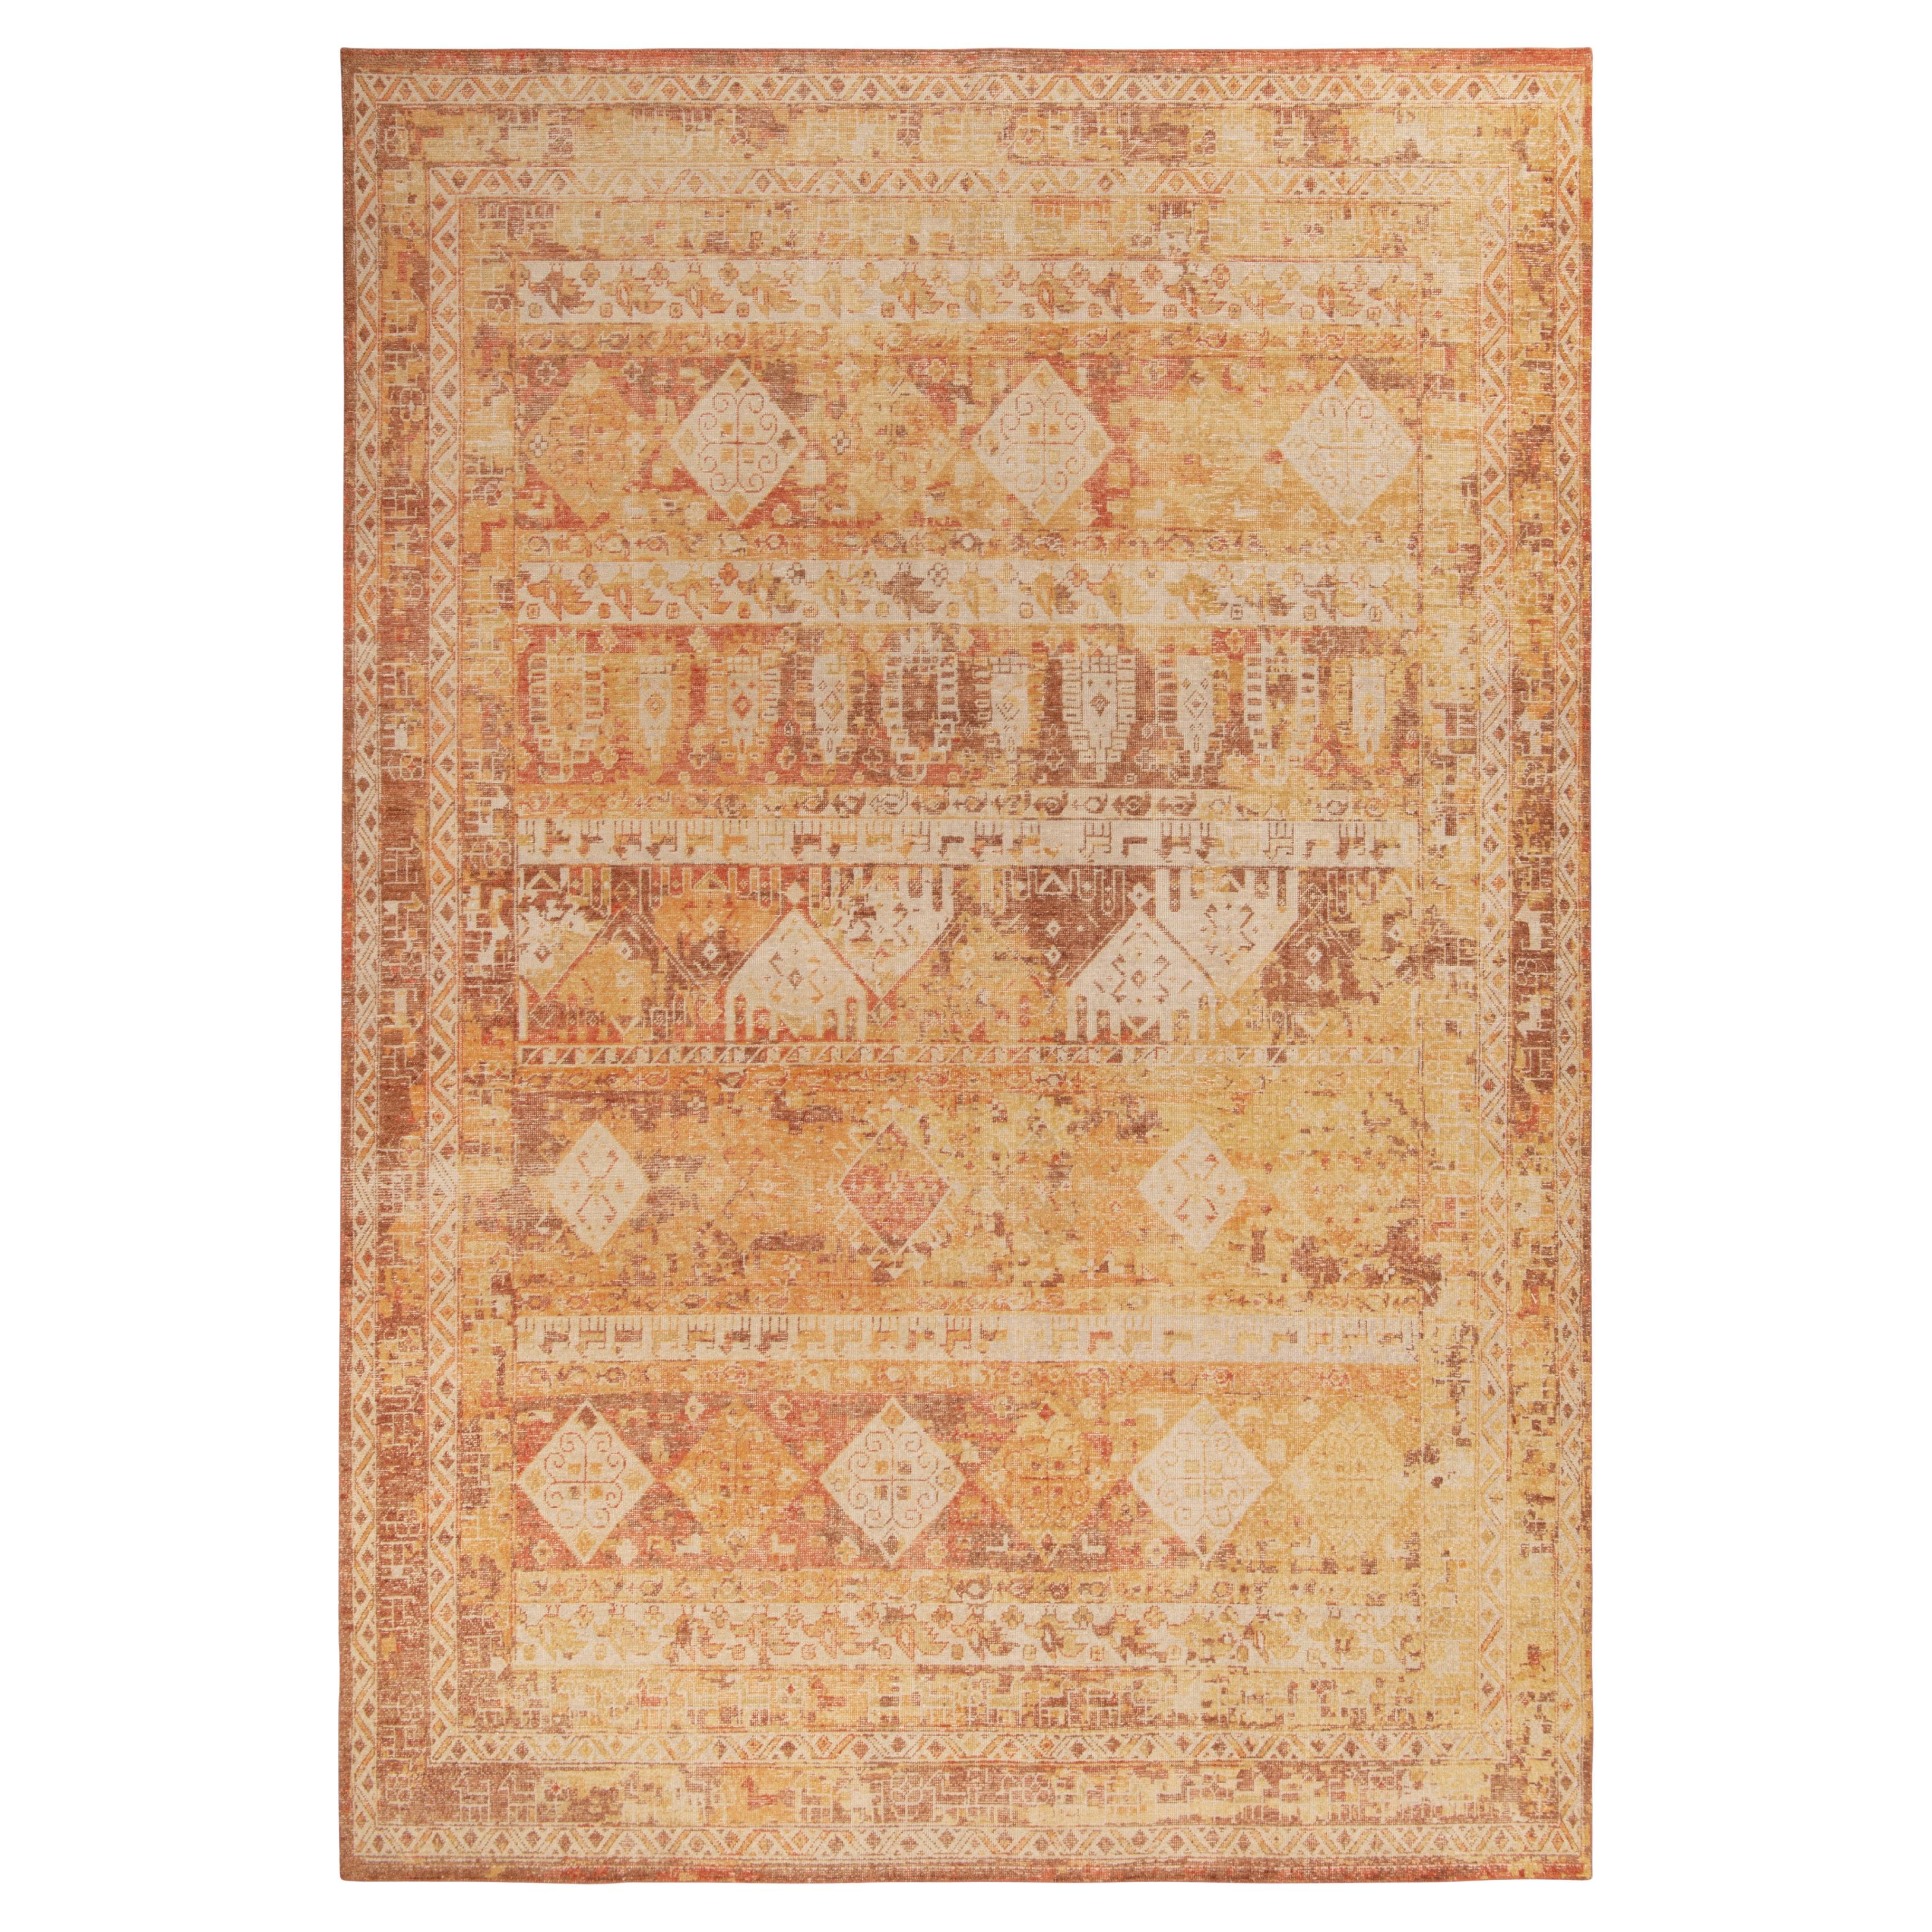 Rug & Kilim's Distressed Tribal Style Teppich in Orange-Rot, Beige Geometrisches Muster